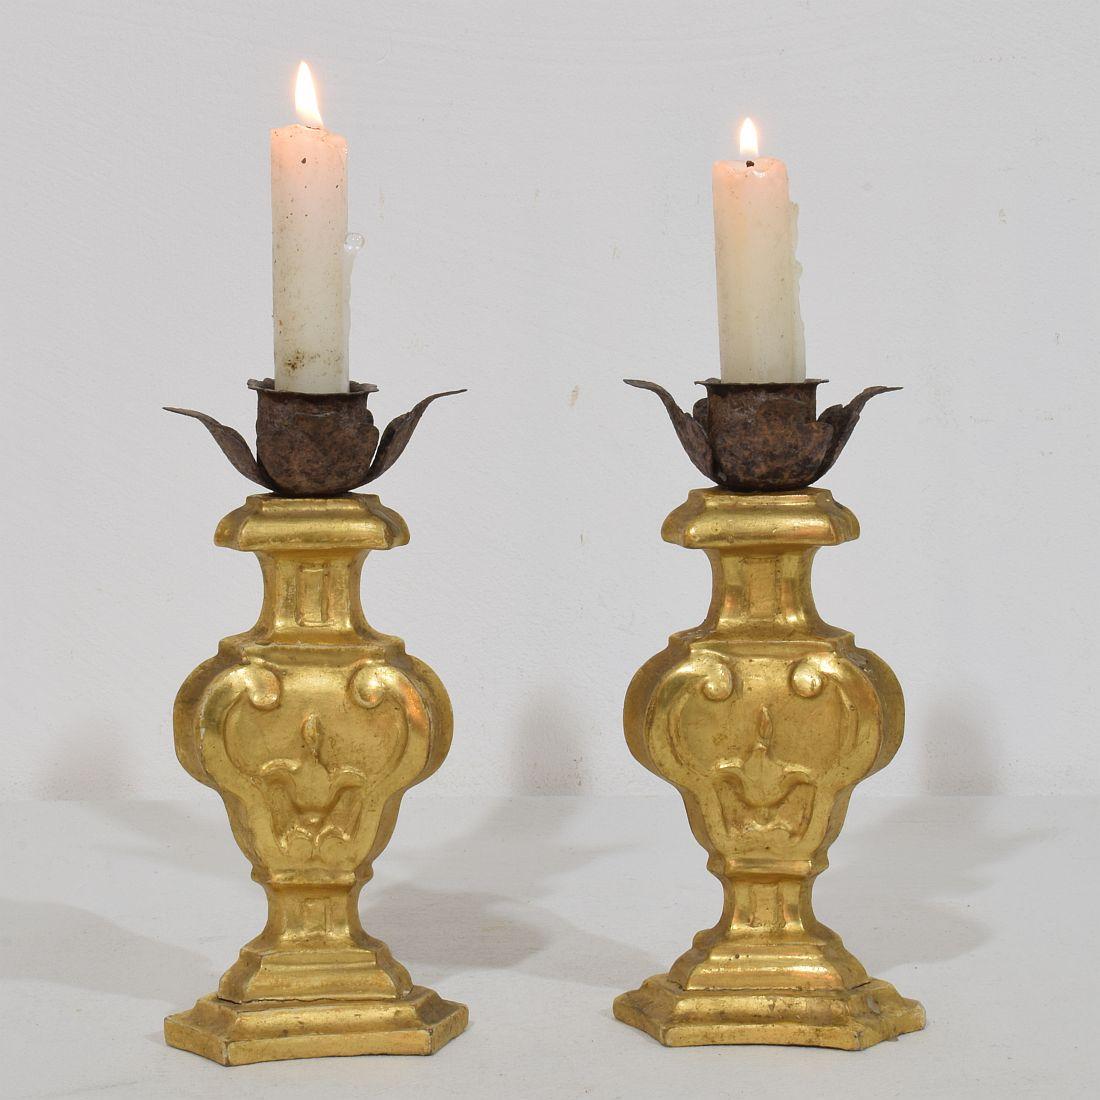 Great pair of small wooden candleholders with their original gilding.
Very nice type candleholder and rare to find in a pair.
Italy, circa 1780-1800.
Weathered, small losses.